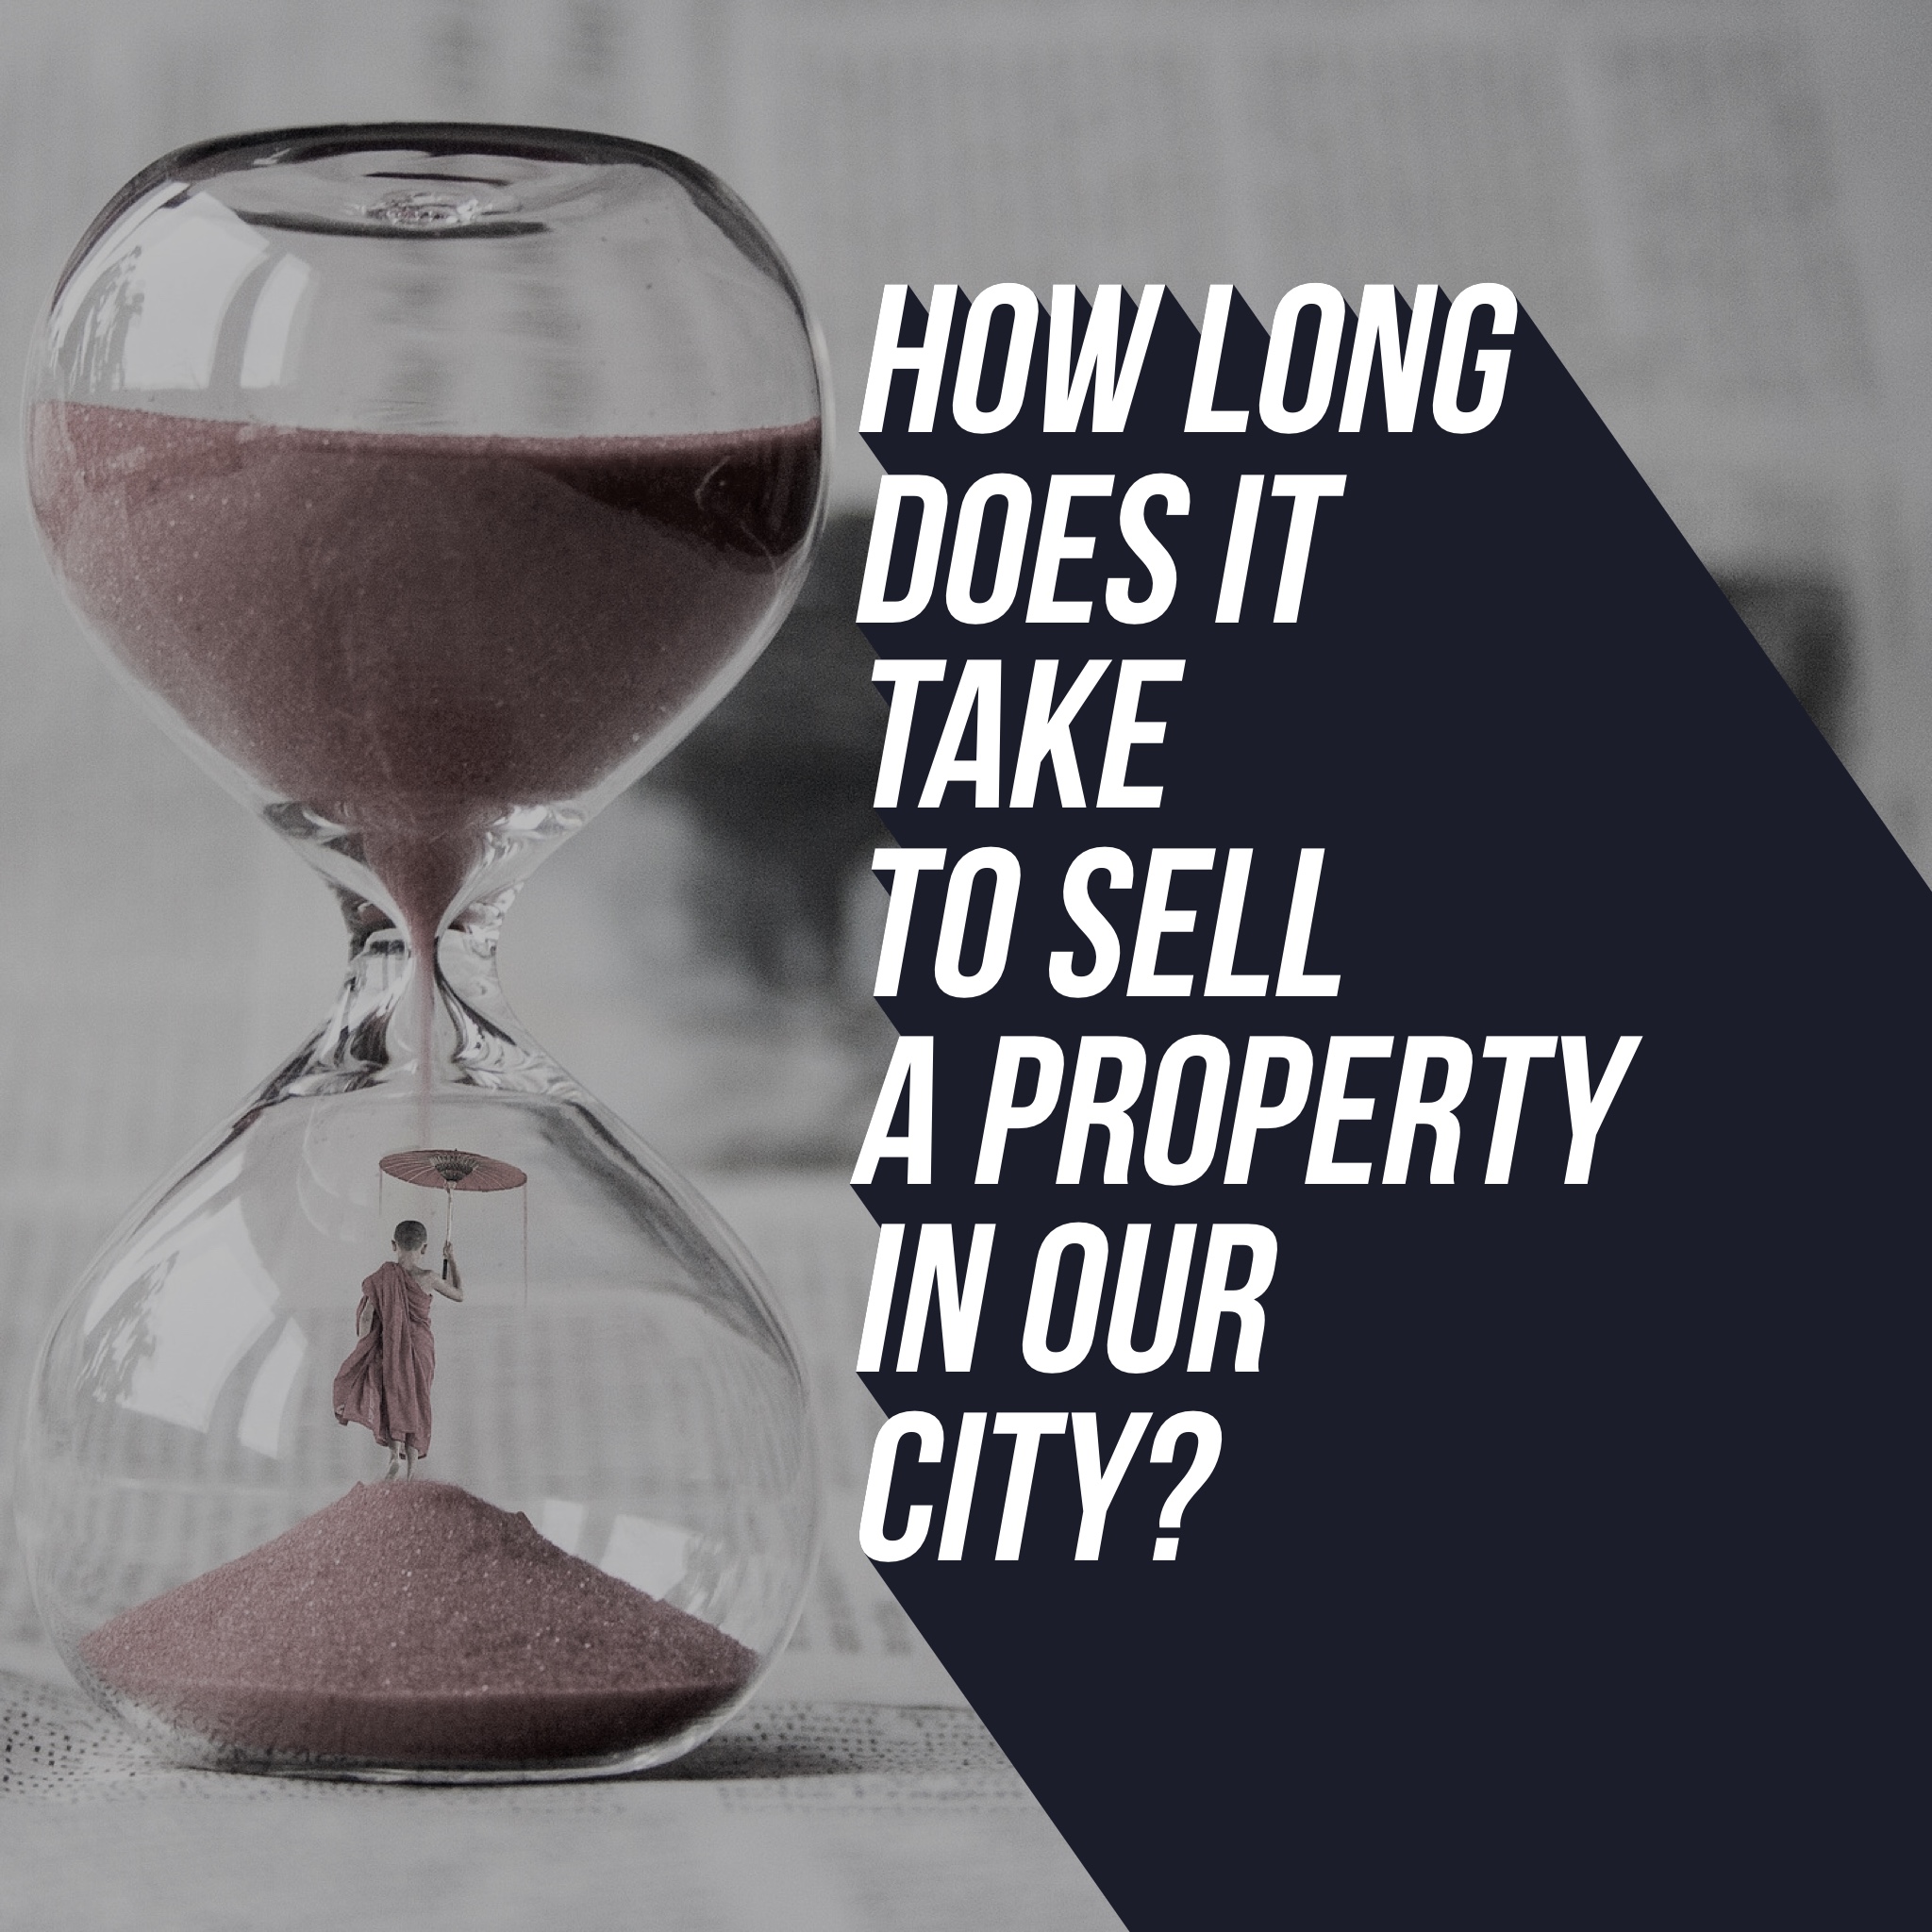 49 Days to Sell a Property...